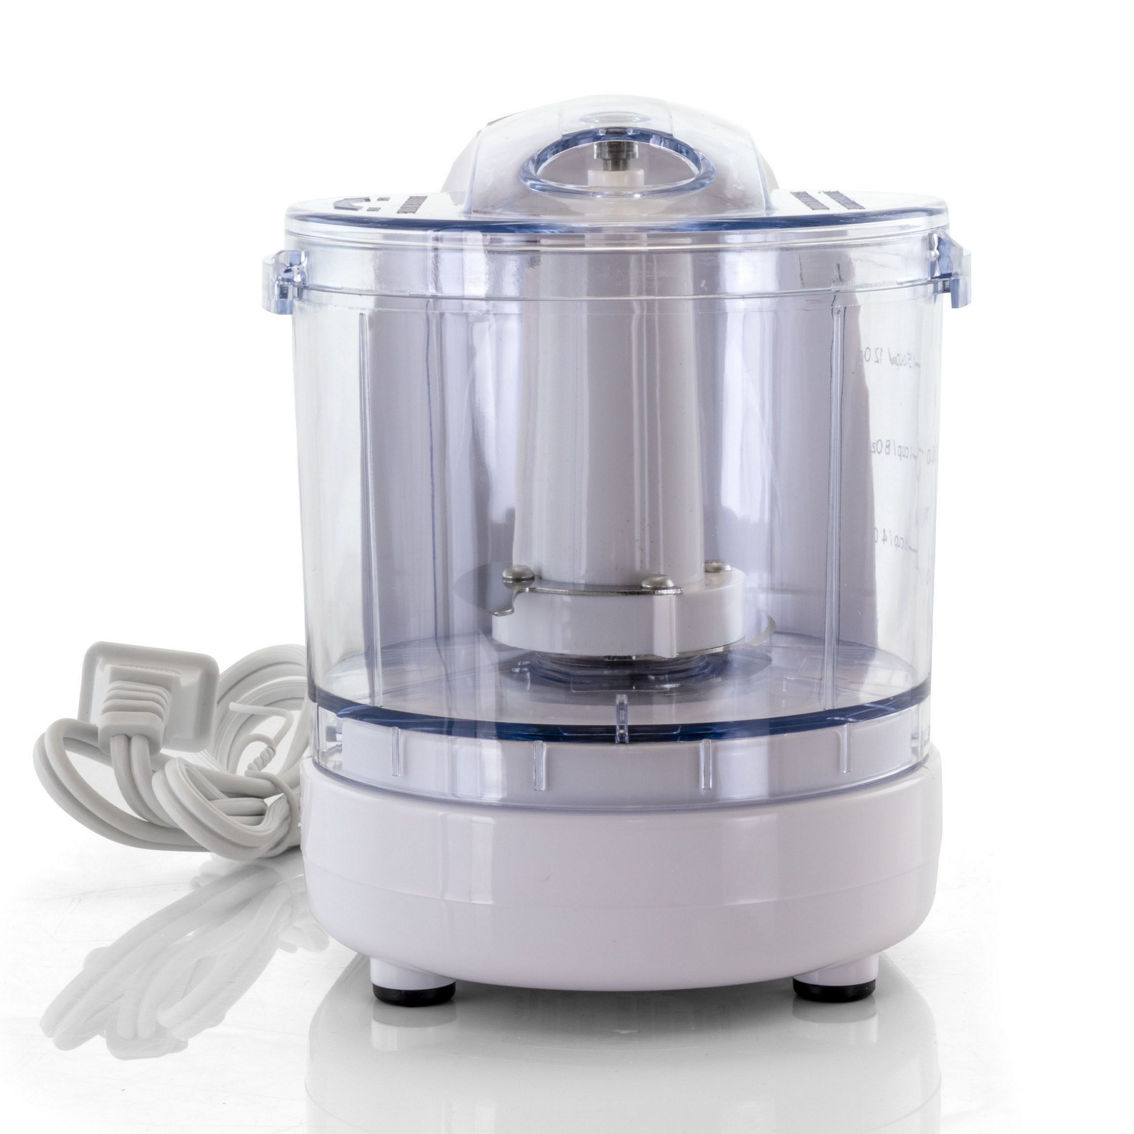 Better Chef 12 Ounce Compact Chopper in White - Image 5 of 5